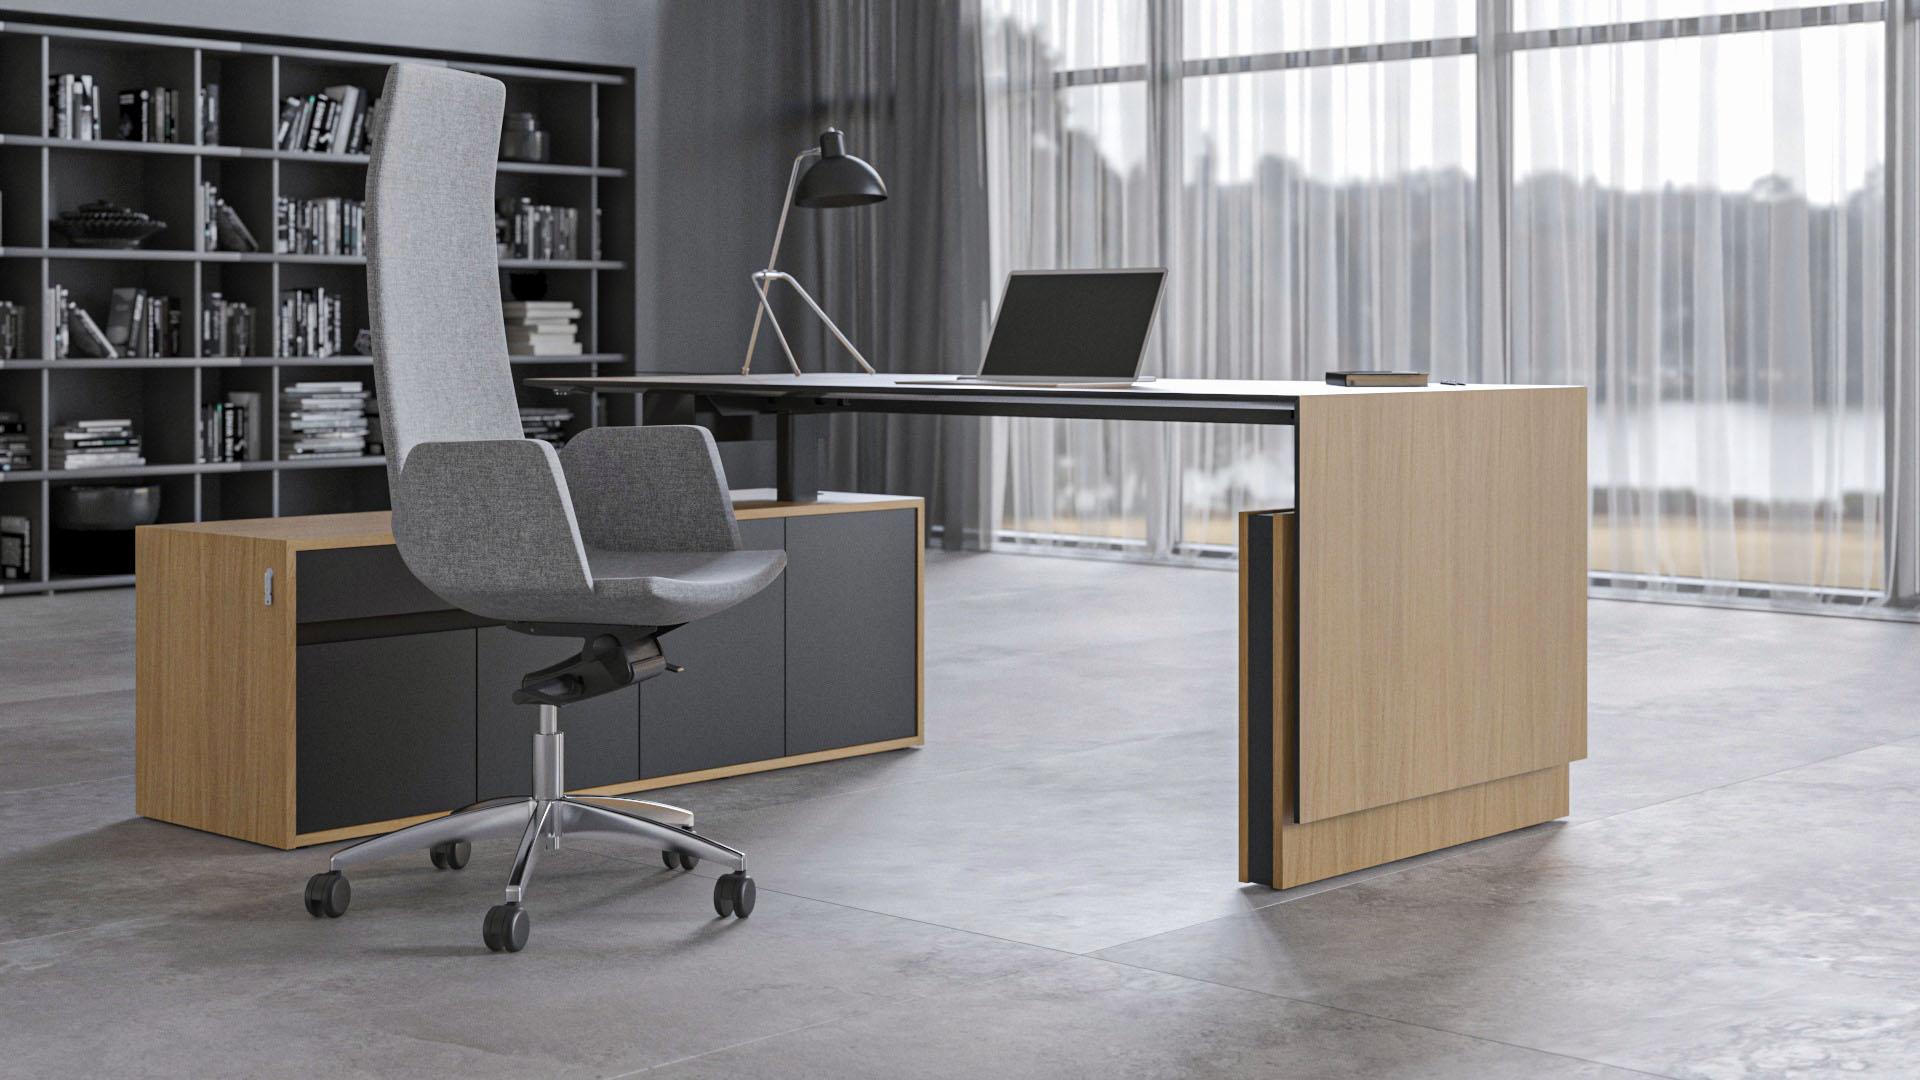 MOTION Executive is a system of electric height adjustable desks, designed for a workplace of a dynamic leader. This desk is a combination of modern elegance and thoughtful functionality.